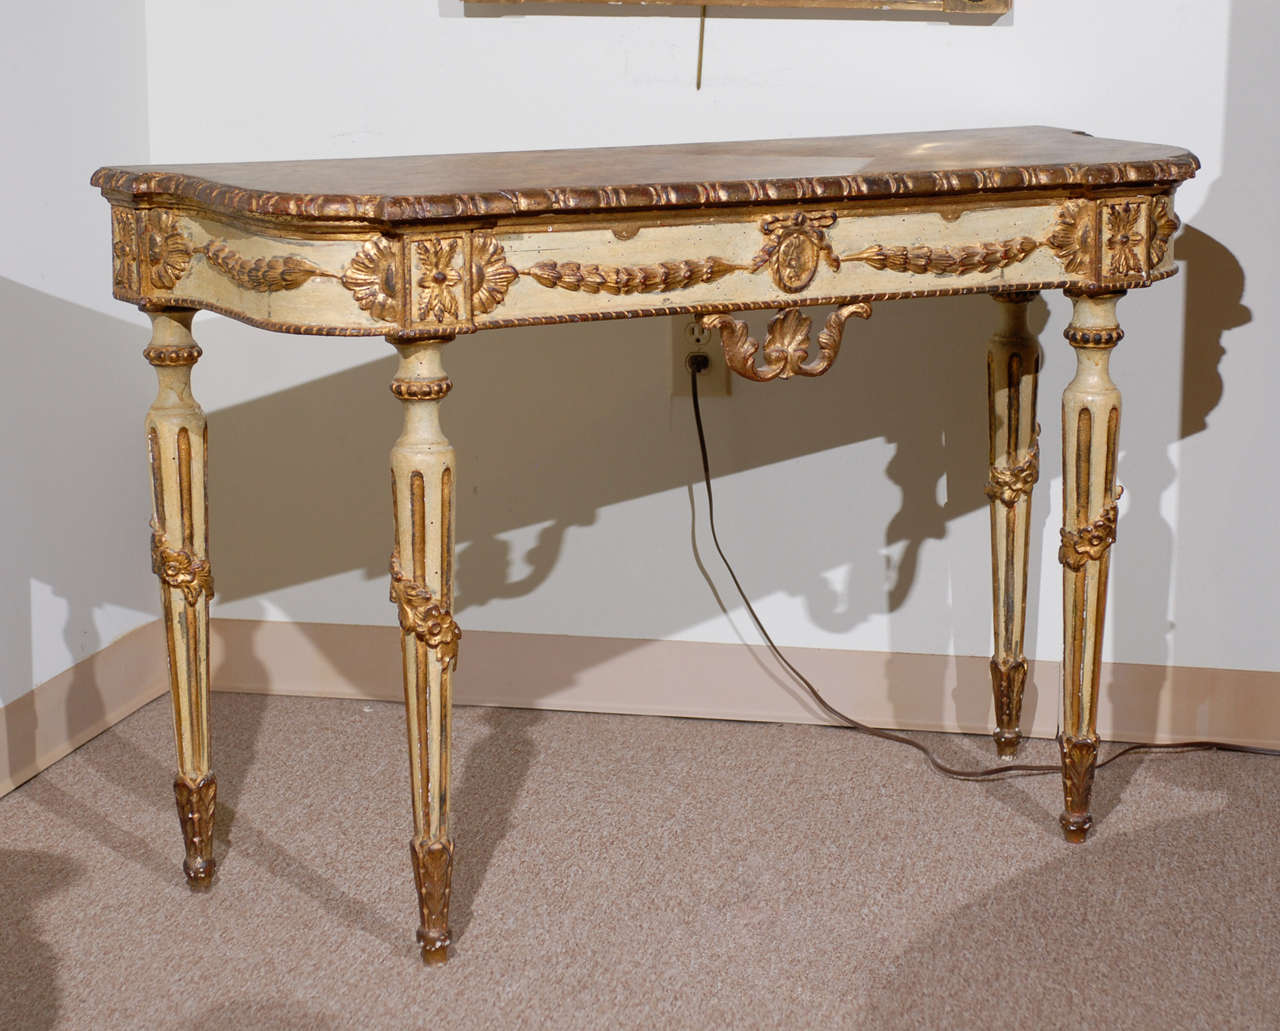 A Pair of Italian Neoclassical Style Painted and Parcel Gilt D-Shaped Console Tables with Faux Painted Marbleized Tops, Fluted Tapering Legs and Carved Flower and Swag Detail, first quarter of the 20th Century.